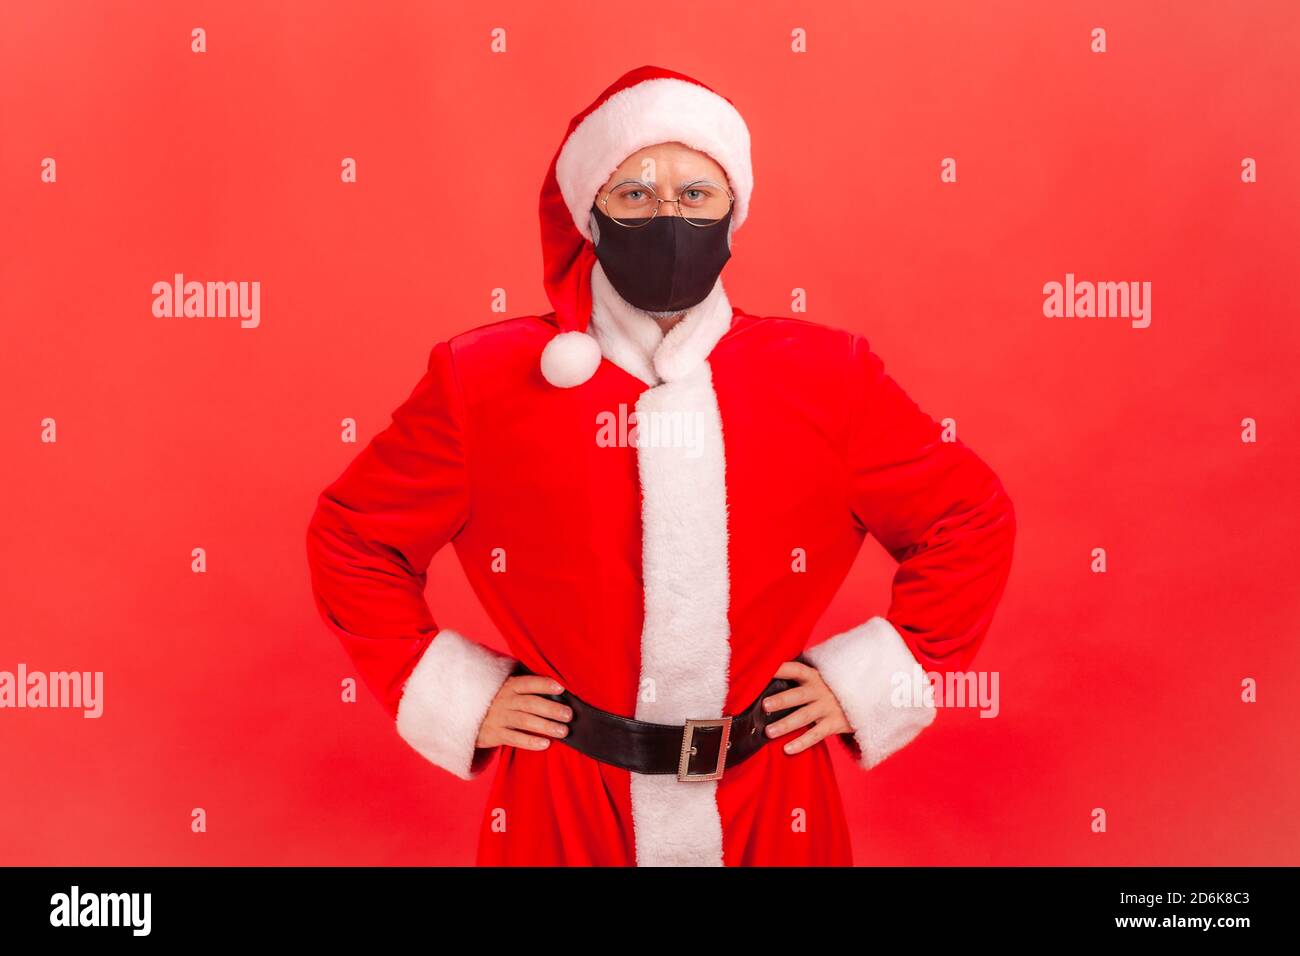 Serious concerned santa claus in eyeglasses wearing protective facial mask looking at camera holding hands akimbo, quarantine on holidays. Indoor stud Stock Photo